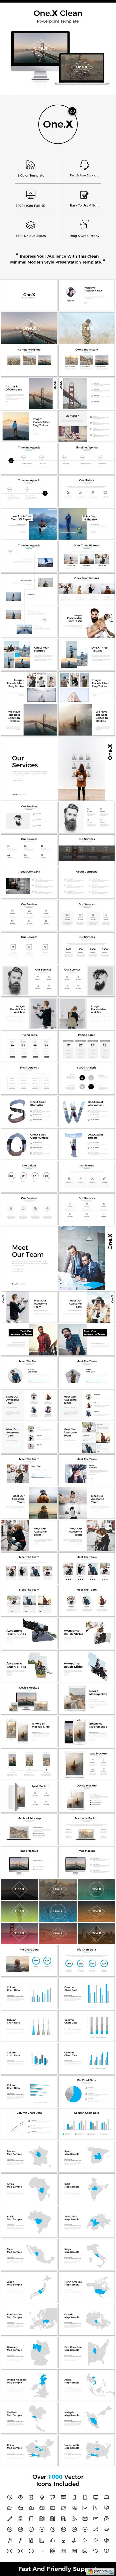 One.X 2.0 Clean Powerpoint Template